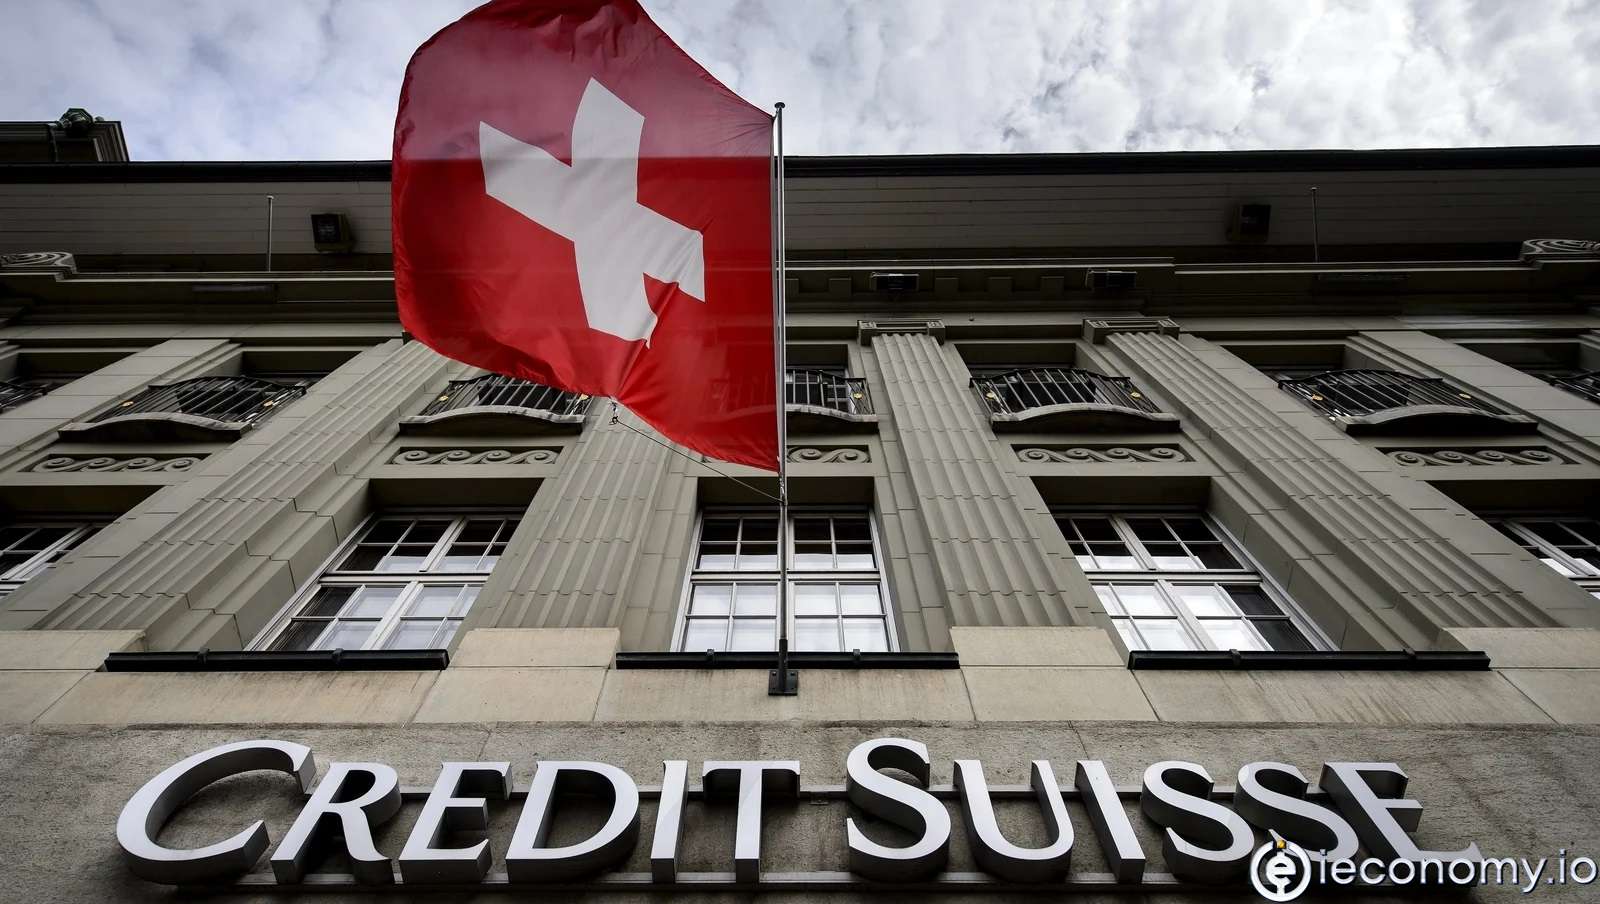 A series of scandals forced Switzerland to consider fining banks